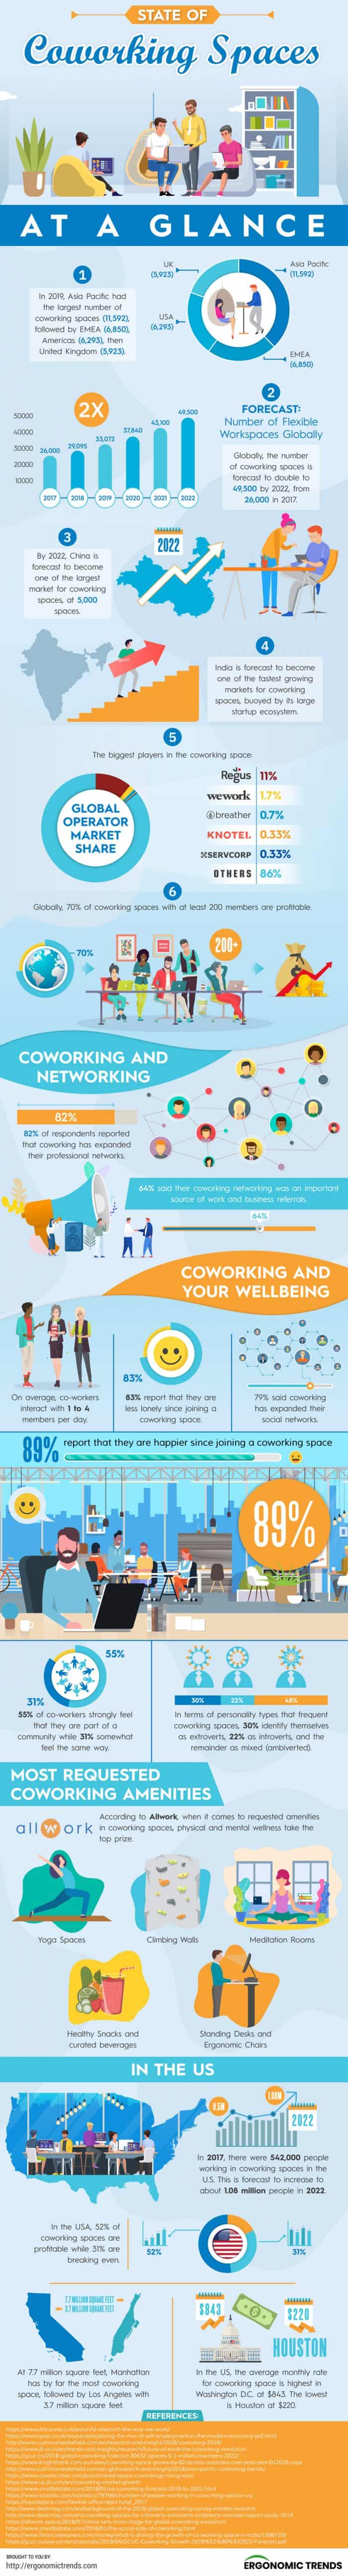 Statistics about coworking spaces in various countries